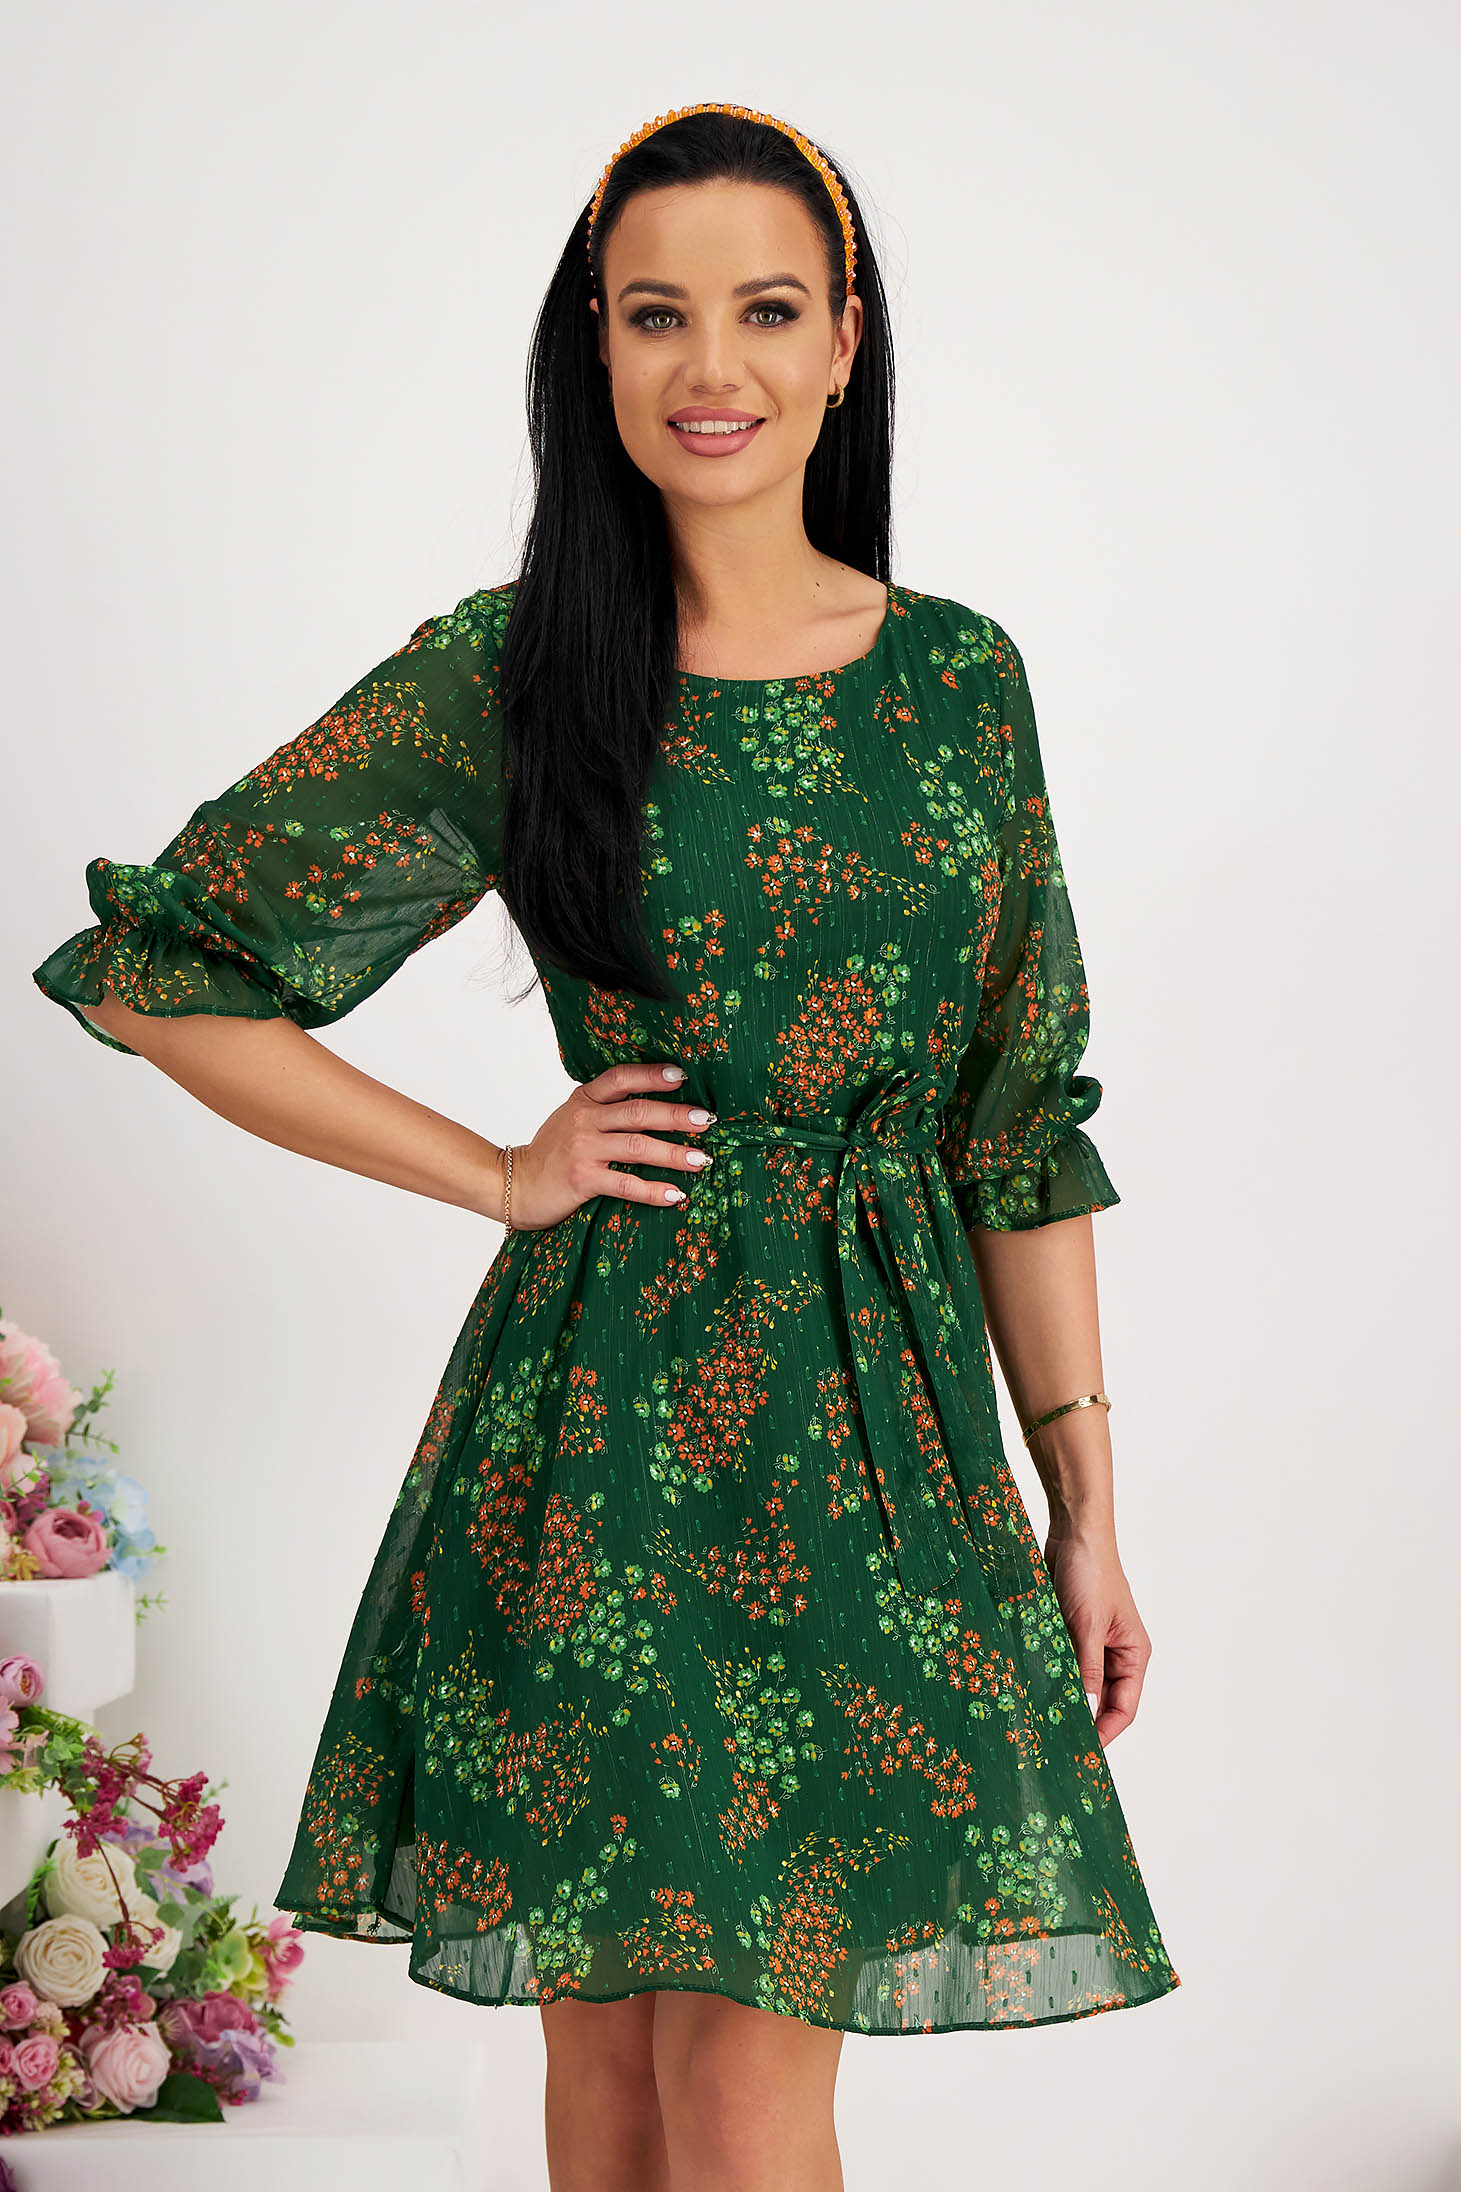 Green dress short cut cloche from veil fabric with puffed sleeves with 3/4 sleeves